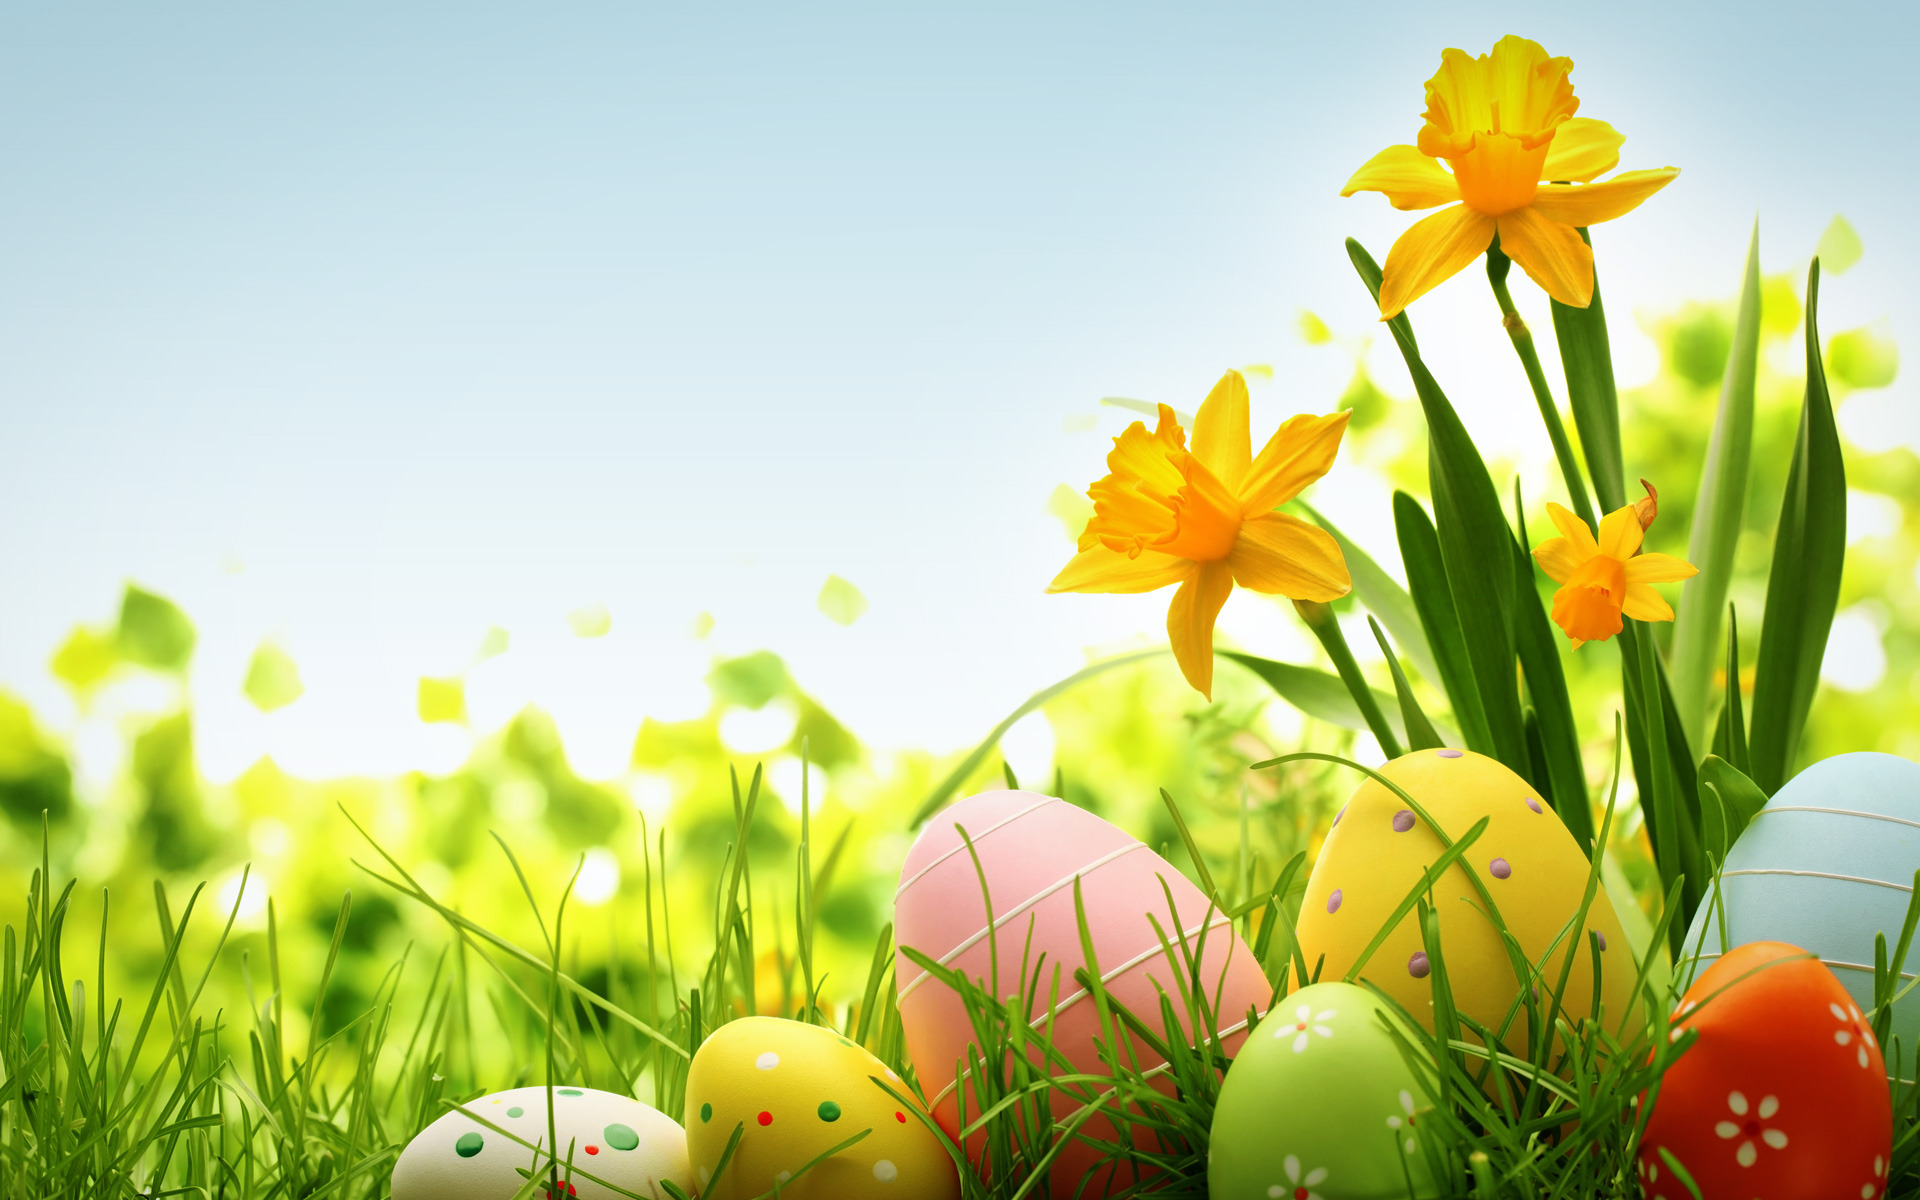 Showing Results Out Of For Easter Wallpaper